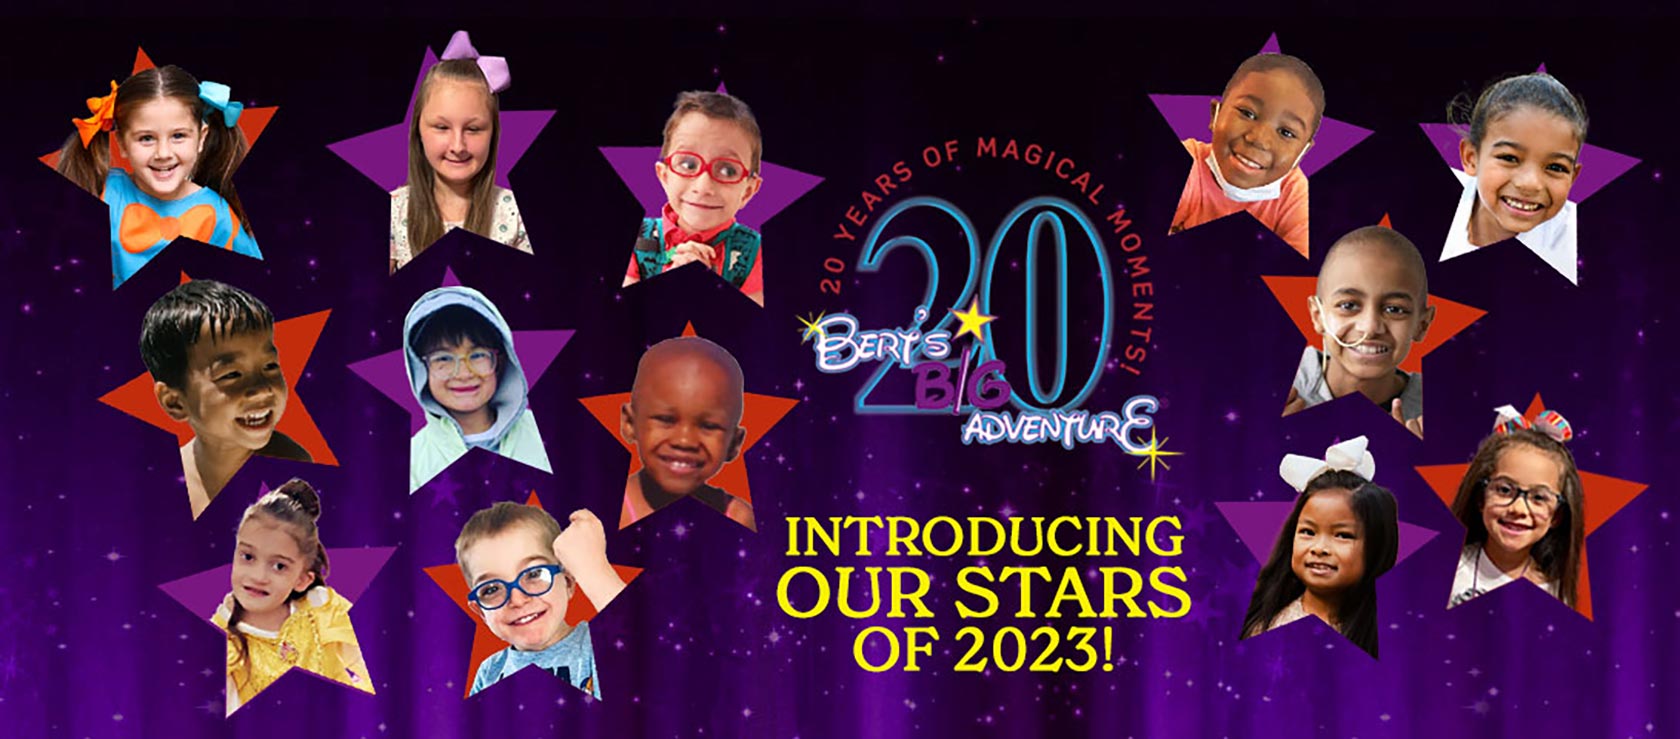 Introducing our stars of 2023!